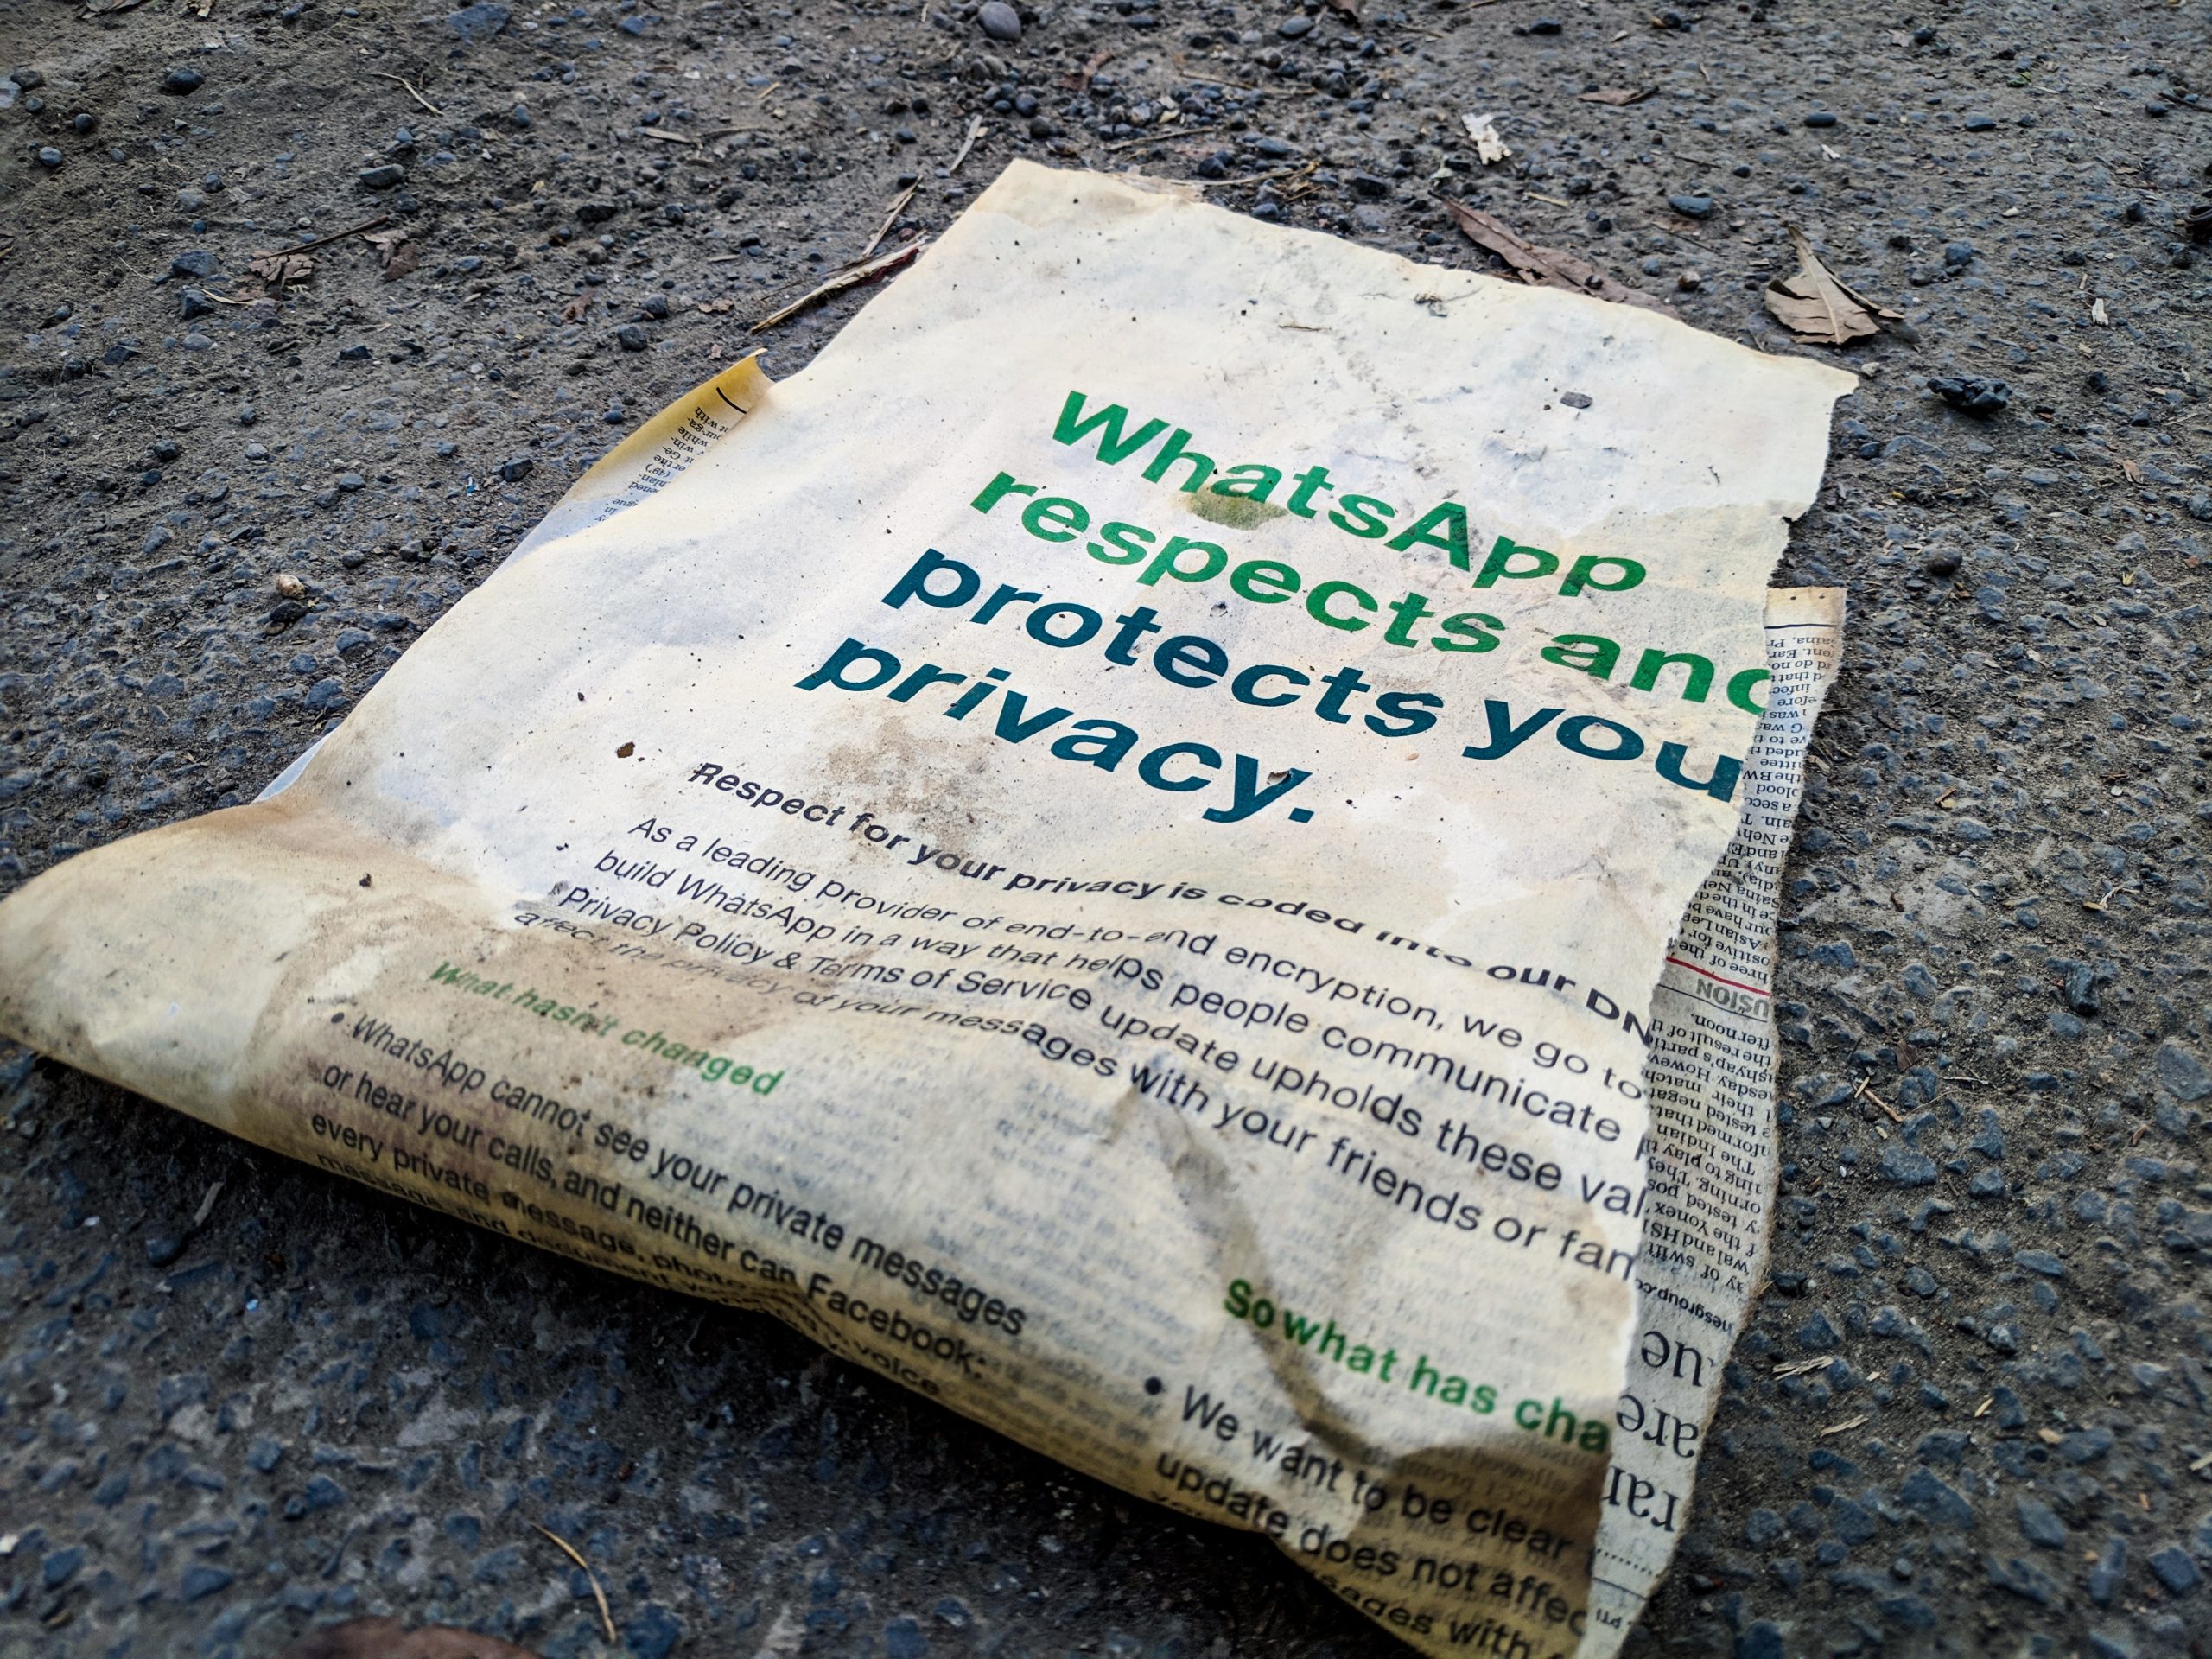 newspaper with text that says Whatsapp respects and protects you privacy